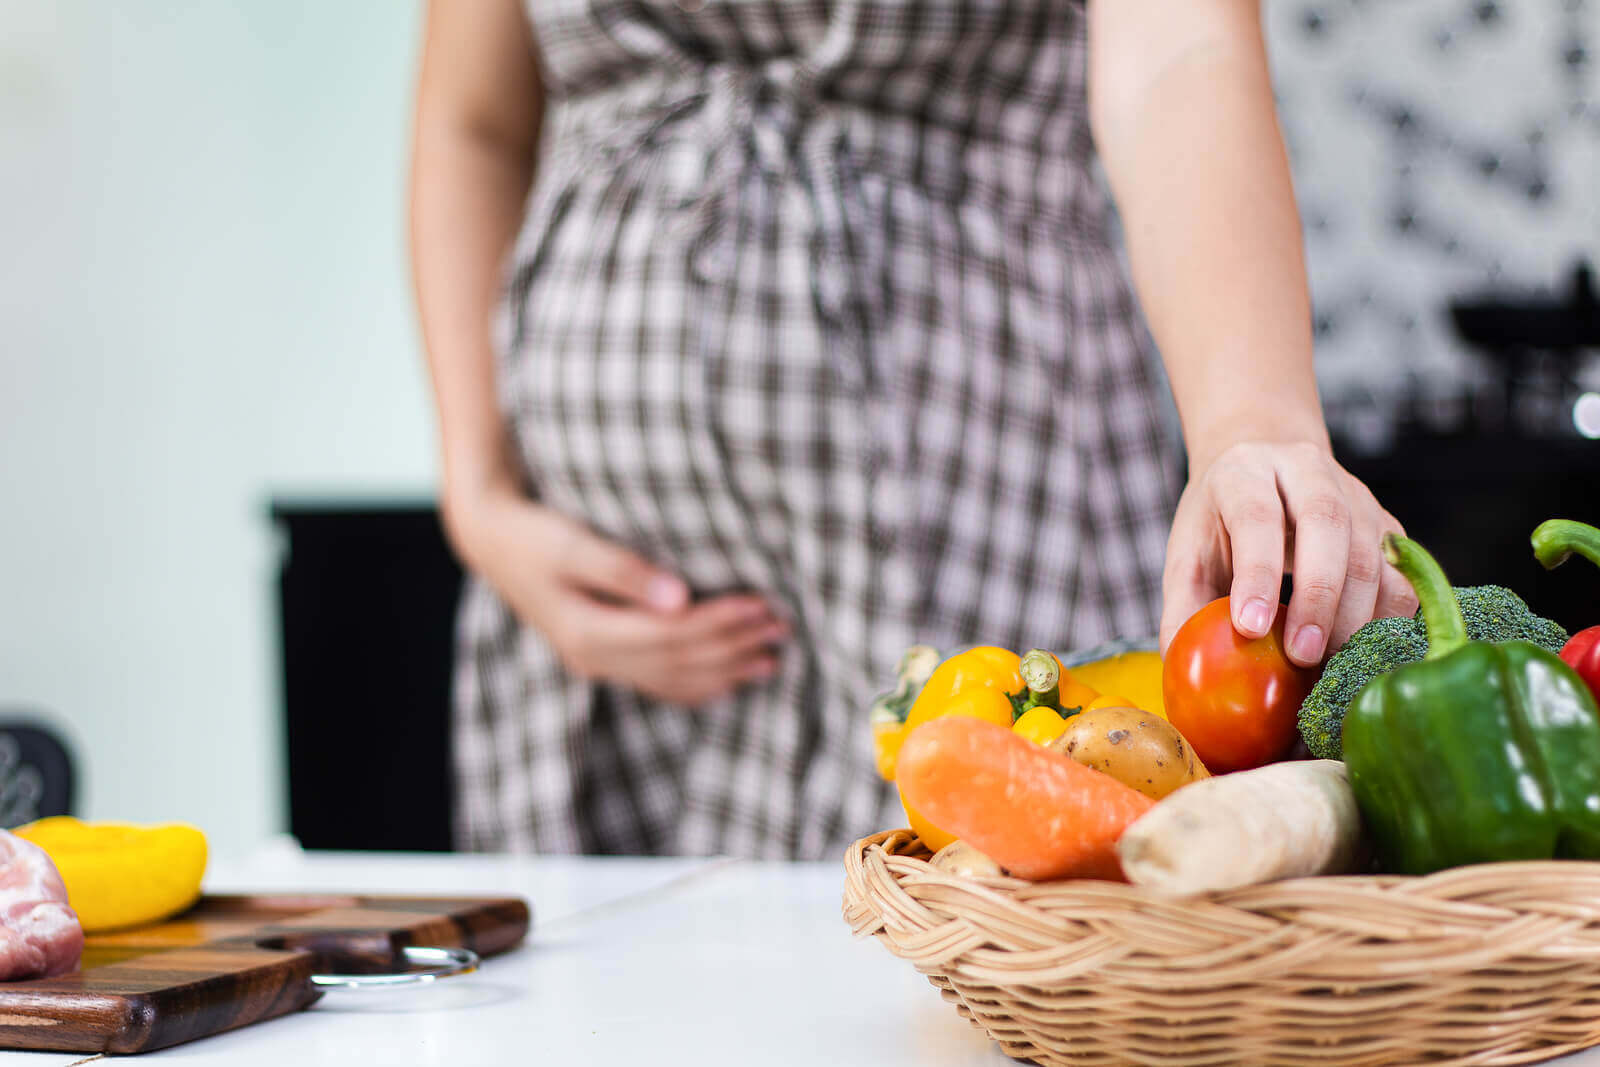 A pregnant woman grabbing a tomato from a basket of vegetables.